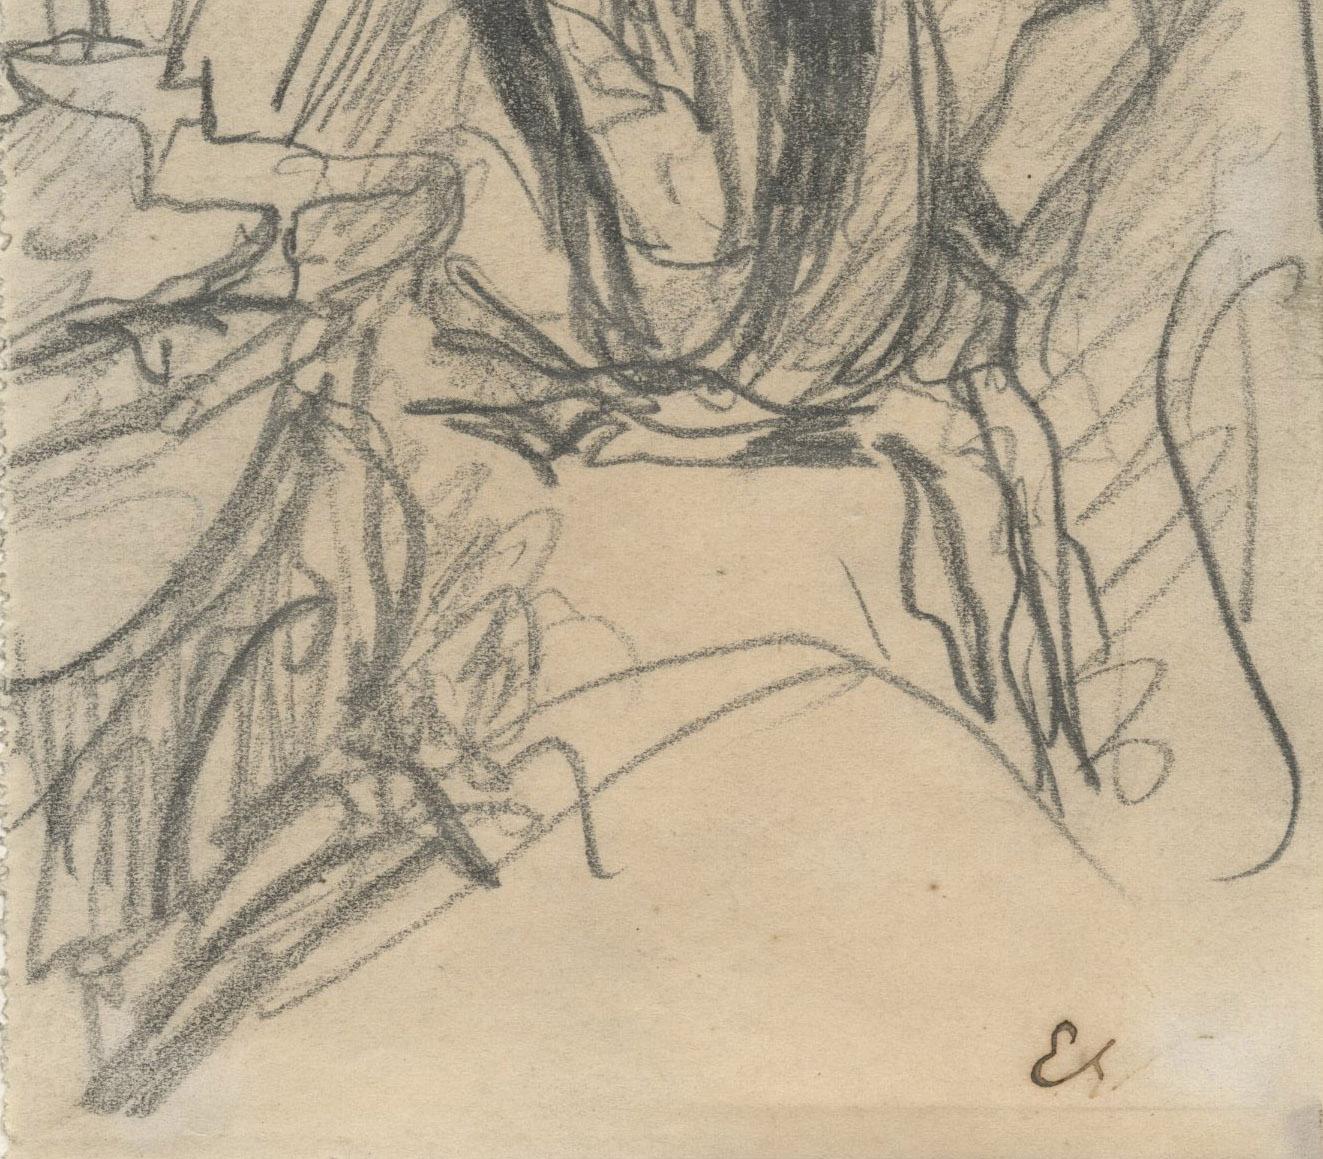 Study of Lucie (Ralph) Belin seated in an interior
Graphite on paper, 1915
Signed with the estate stamp, Lugt 909b, the stamp faded from blue to brown (see photo)
Provenance:
Neffe-Degandt Fine Art, London was a major dealer in art of the Nabi in